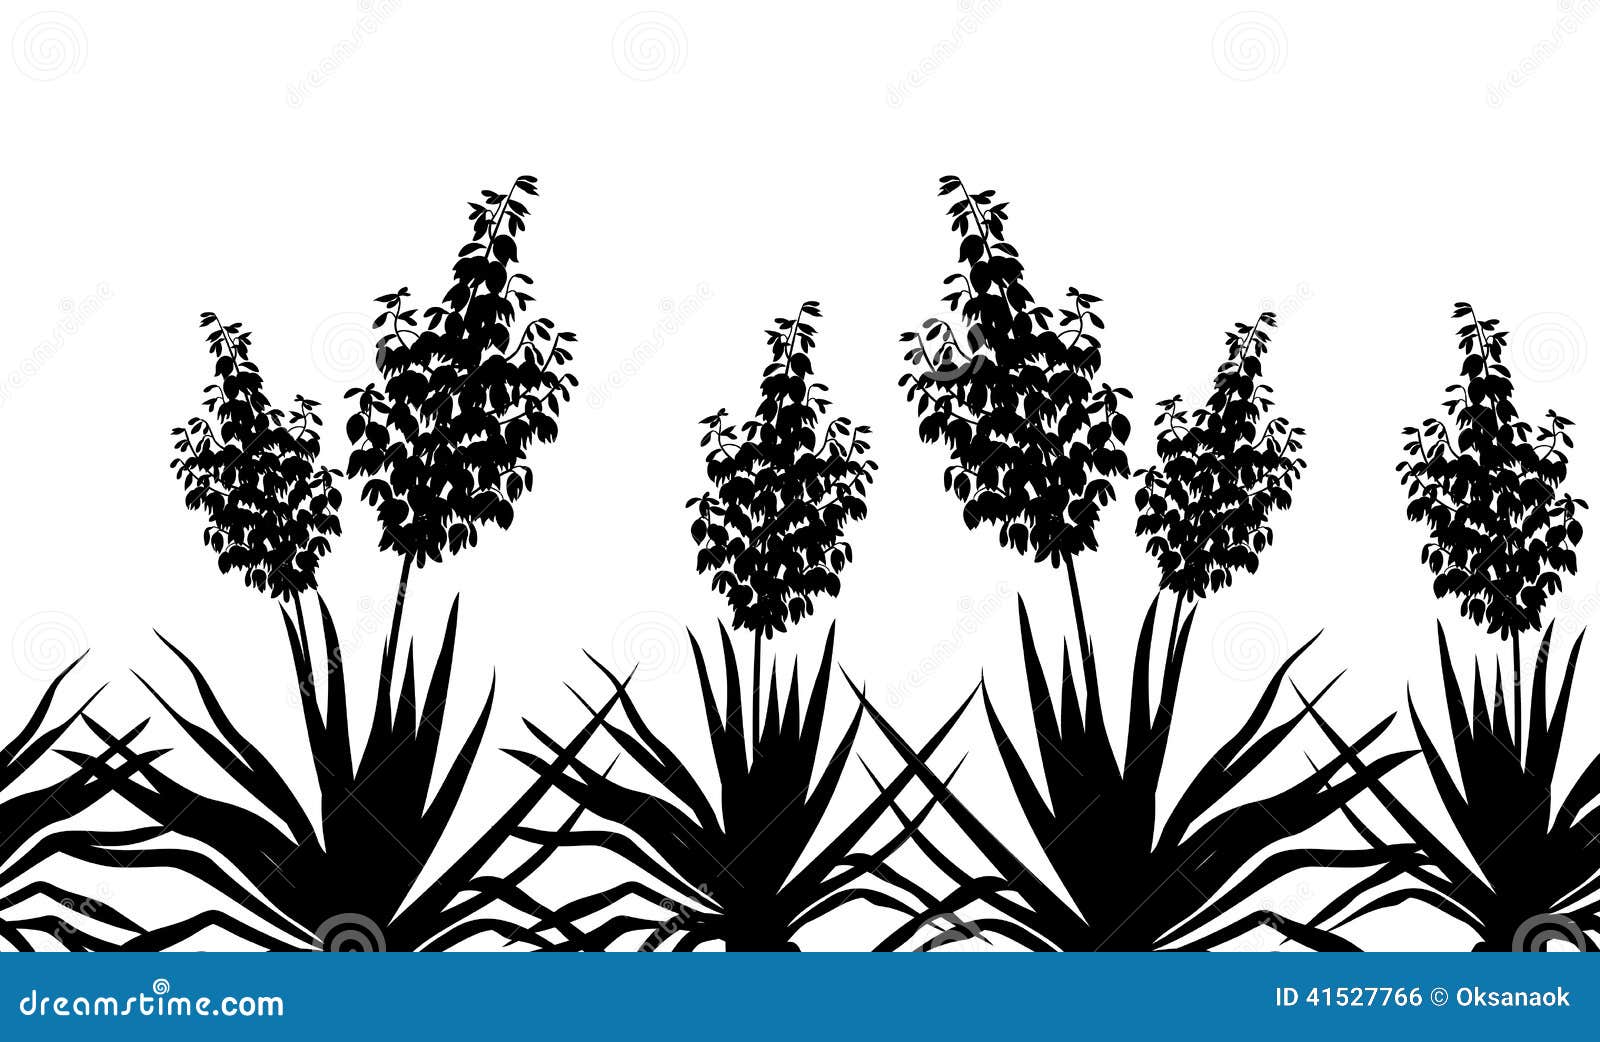 Flowers Yucca Stock Illustrations 153 Flowers Yucca Stock Illustrations Vectors Clipart Dreamstime